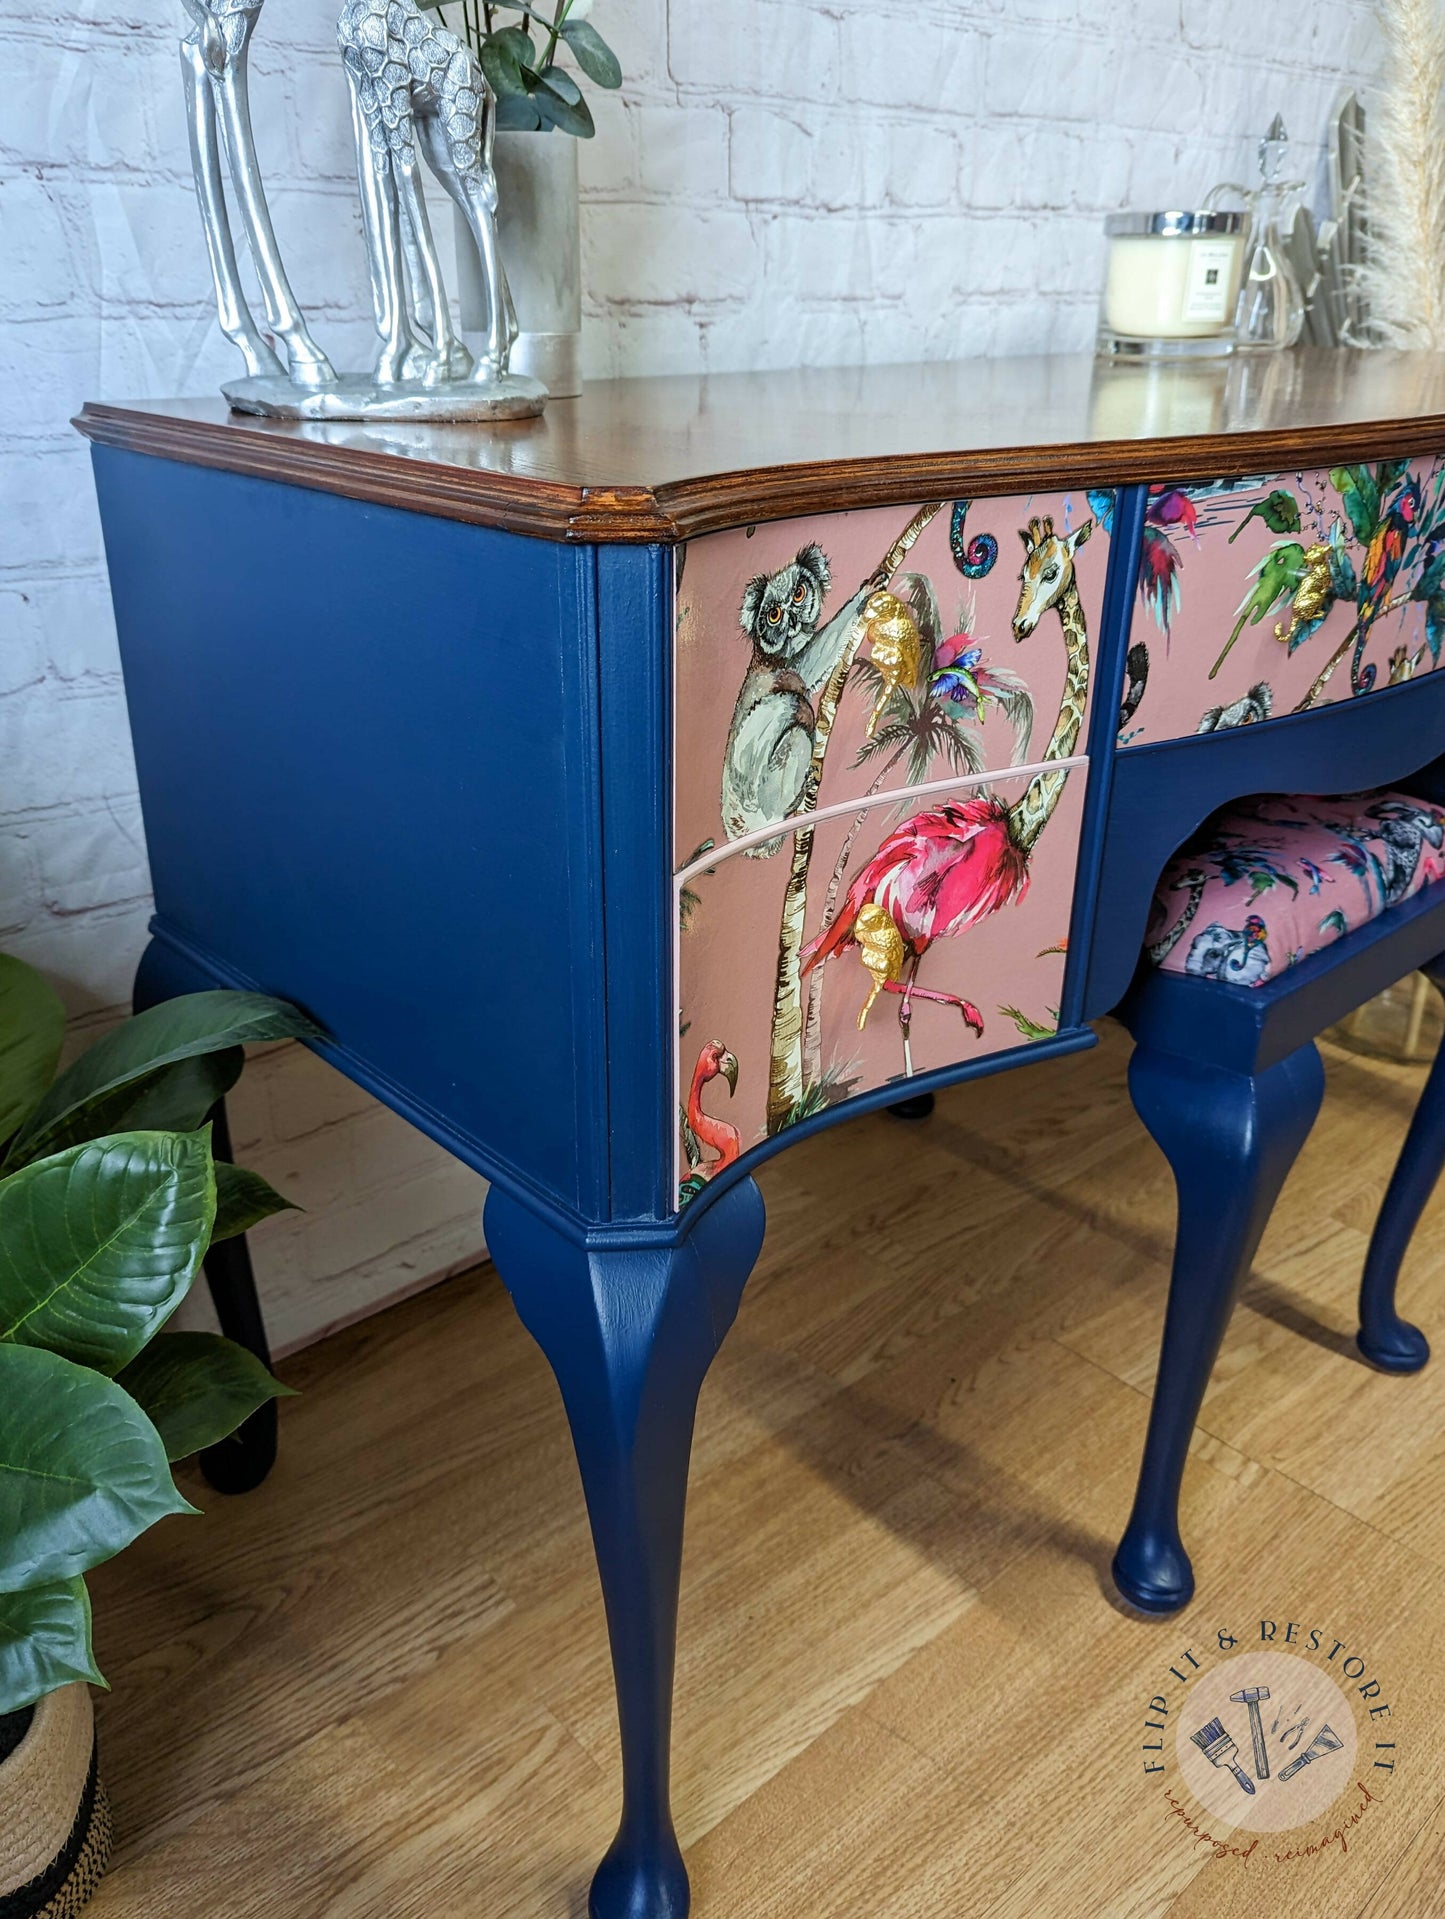 Queen Anne Painted Mahogany Bedroom Set - Dressing Table, Vanity, Desk, Sideboard and Stool, Statement, Maximalist MADE TO ORDER